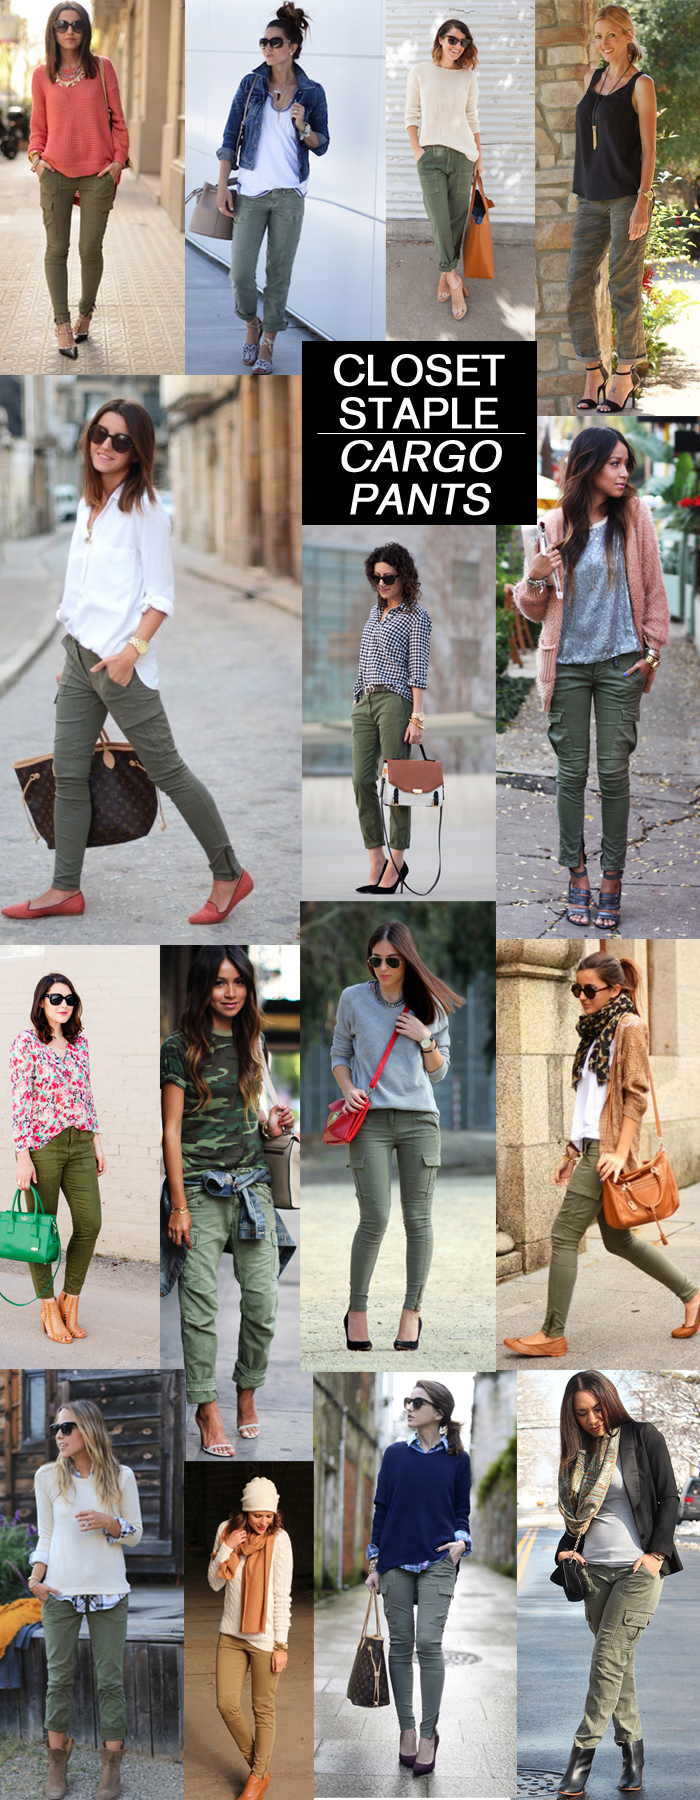 stylish ways to wear army green cargo pants - How to Wear Cargo Pants for Women by popular Florida style blogger The Modern Savvy